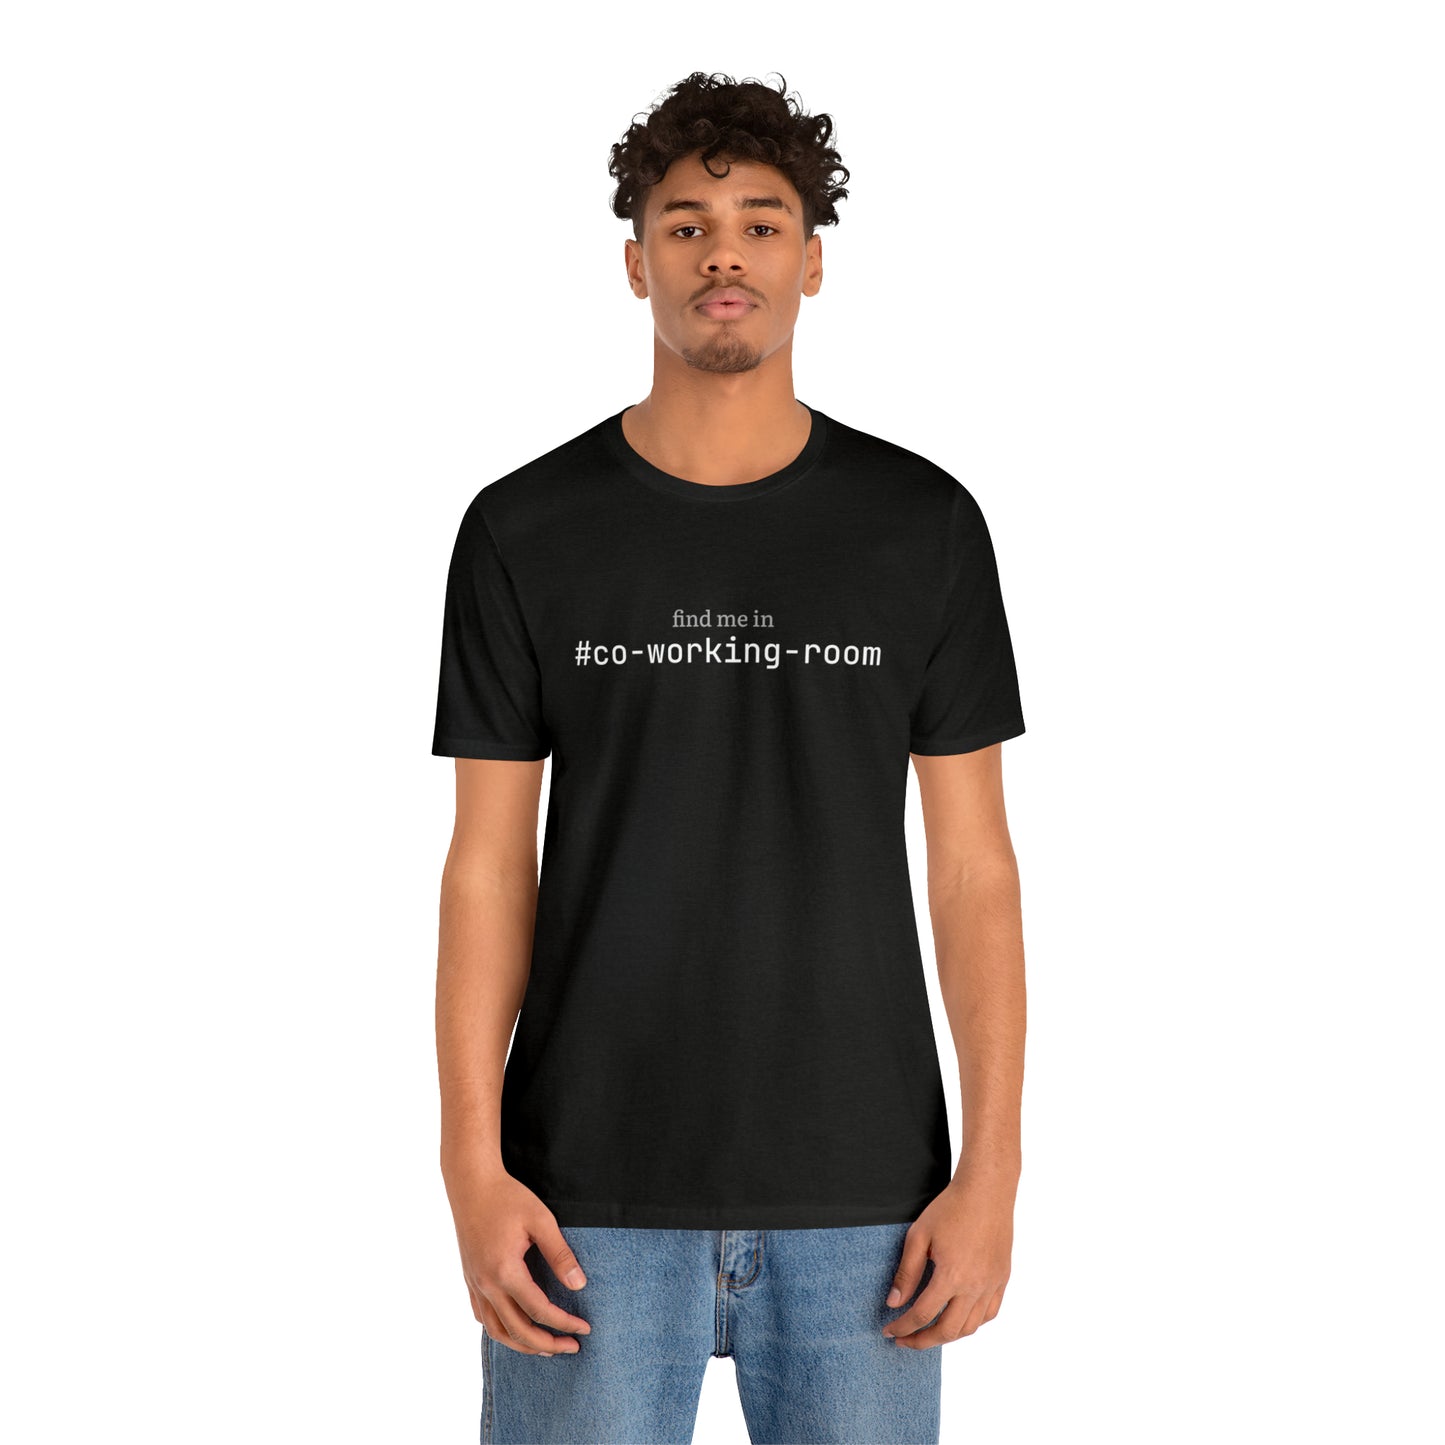 Find me in #co-working-room T-Shirt